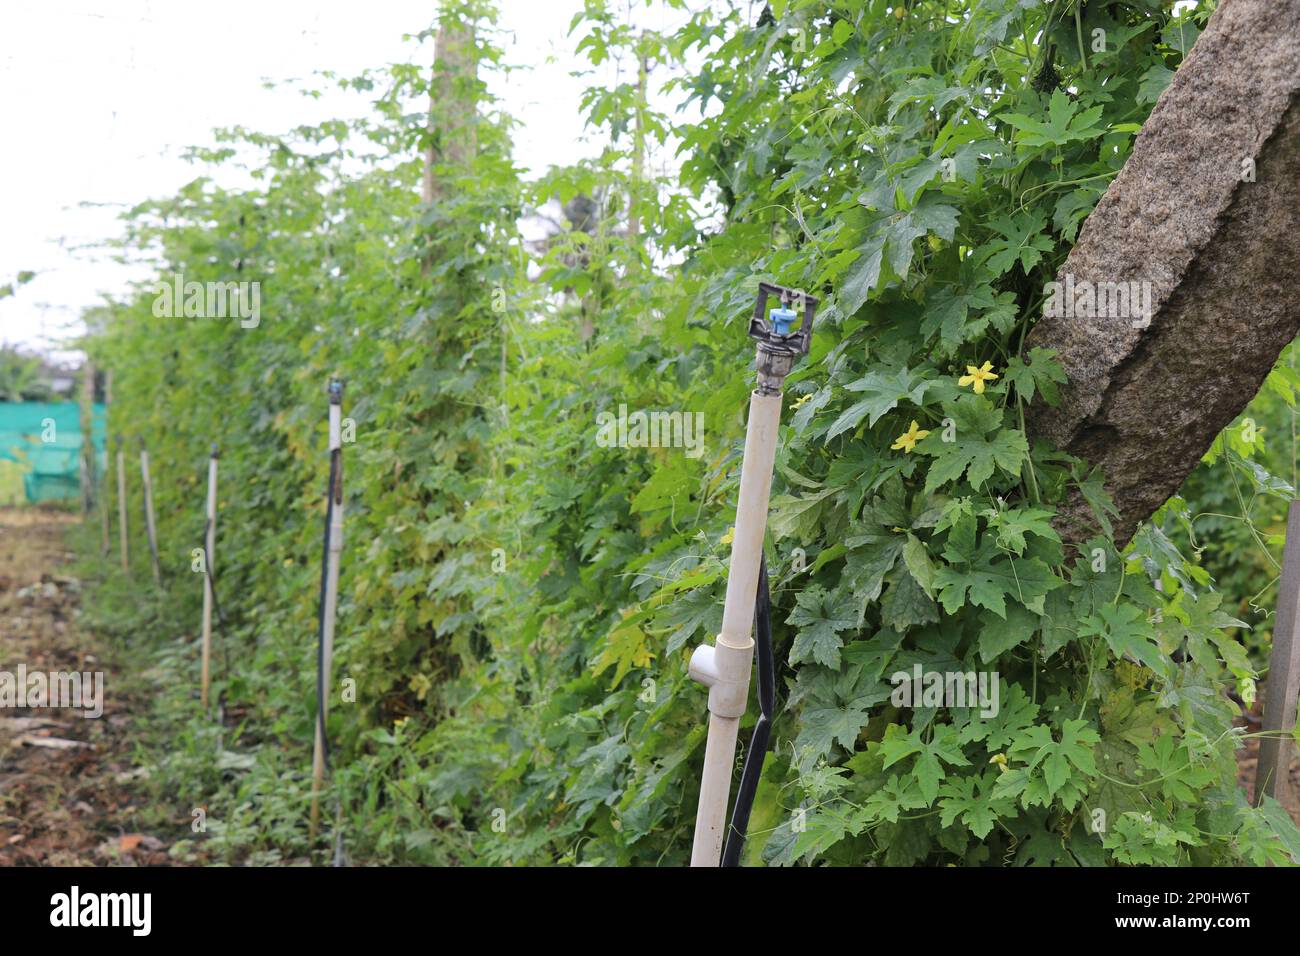 A drip irrigation system and small sprinkler system are used on a bitter gourd or bitter melon farm with a view of fresh vine growing Stock Photo